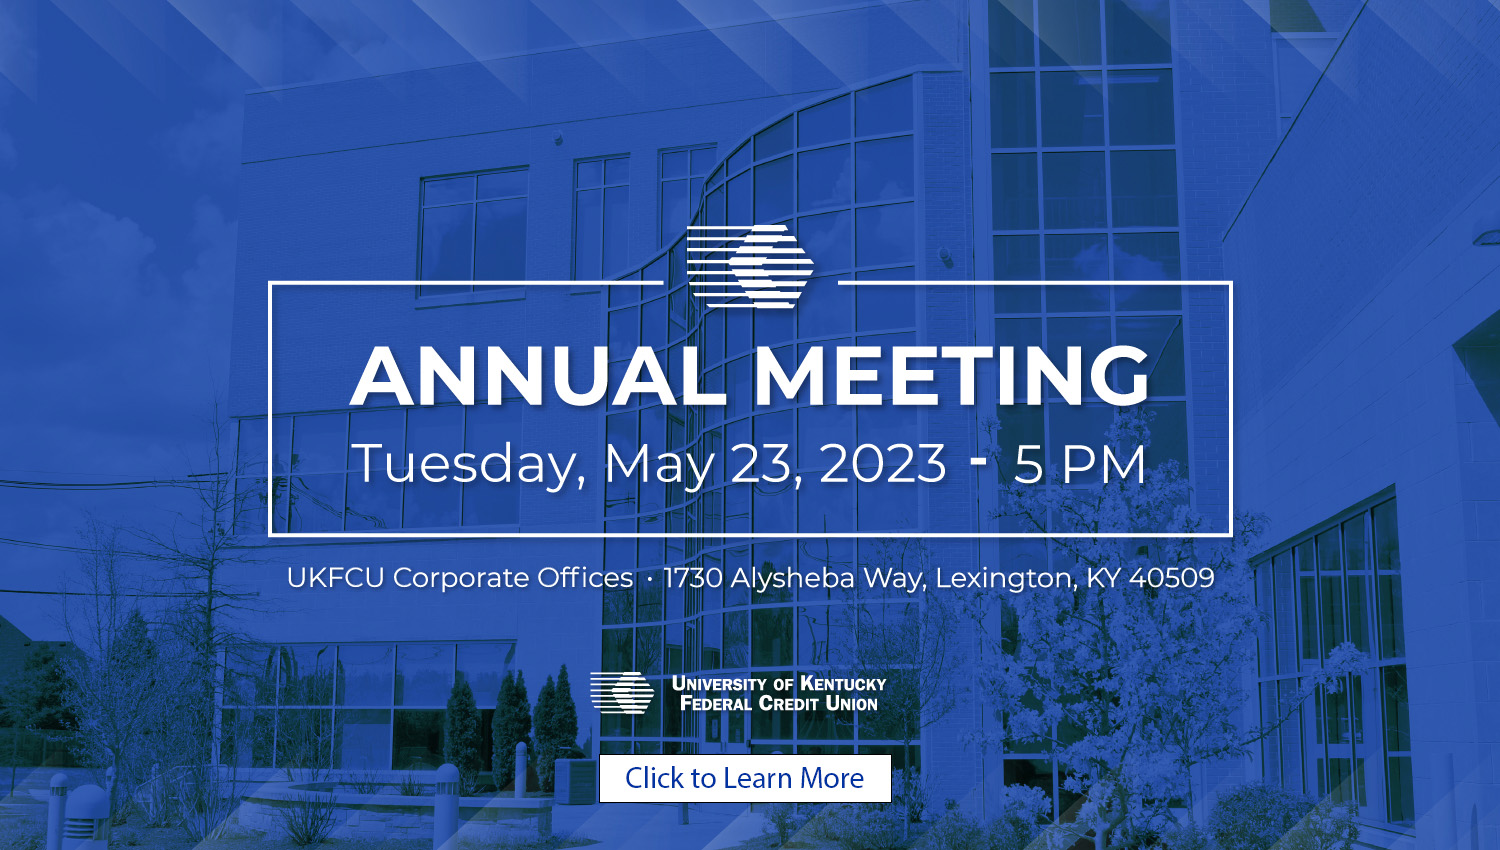 Learn More About the UKFCU Annual Meeting